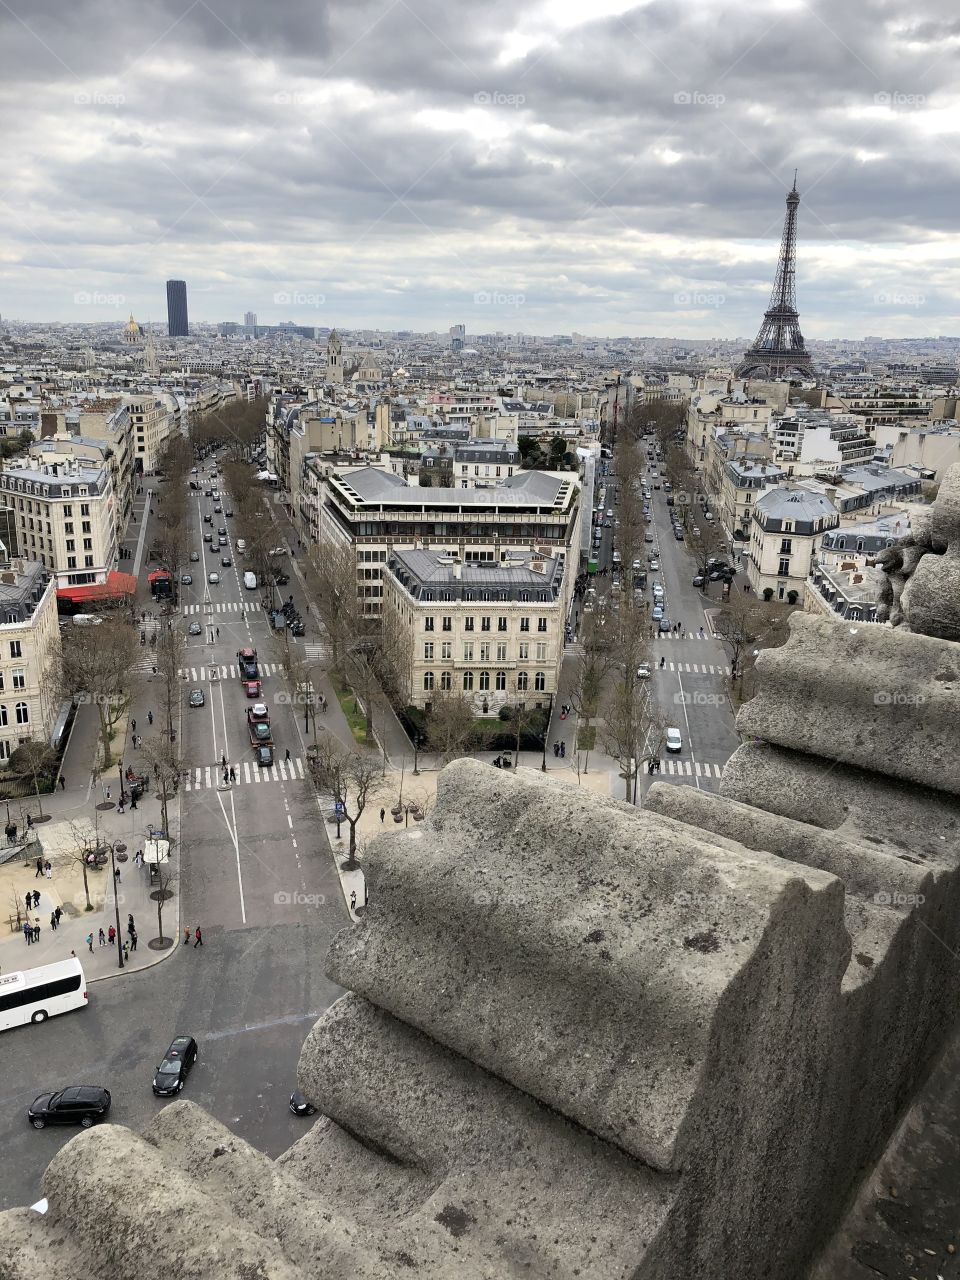 A view of the Paris streets from a top the Arc de Triumph, featuring the Eiffel Tower in the background. 